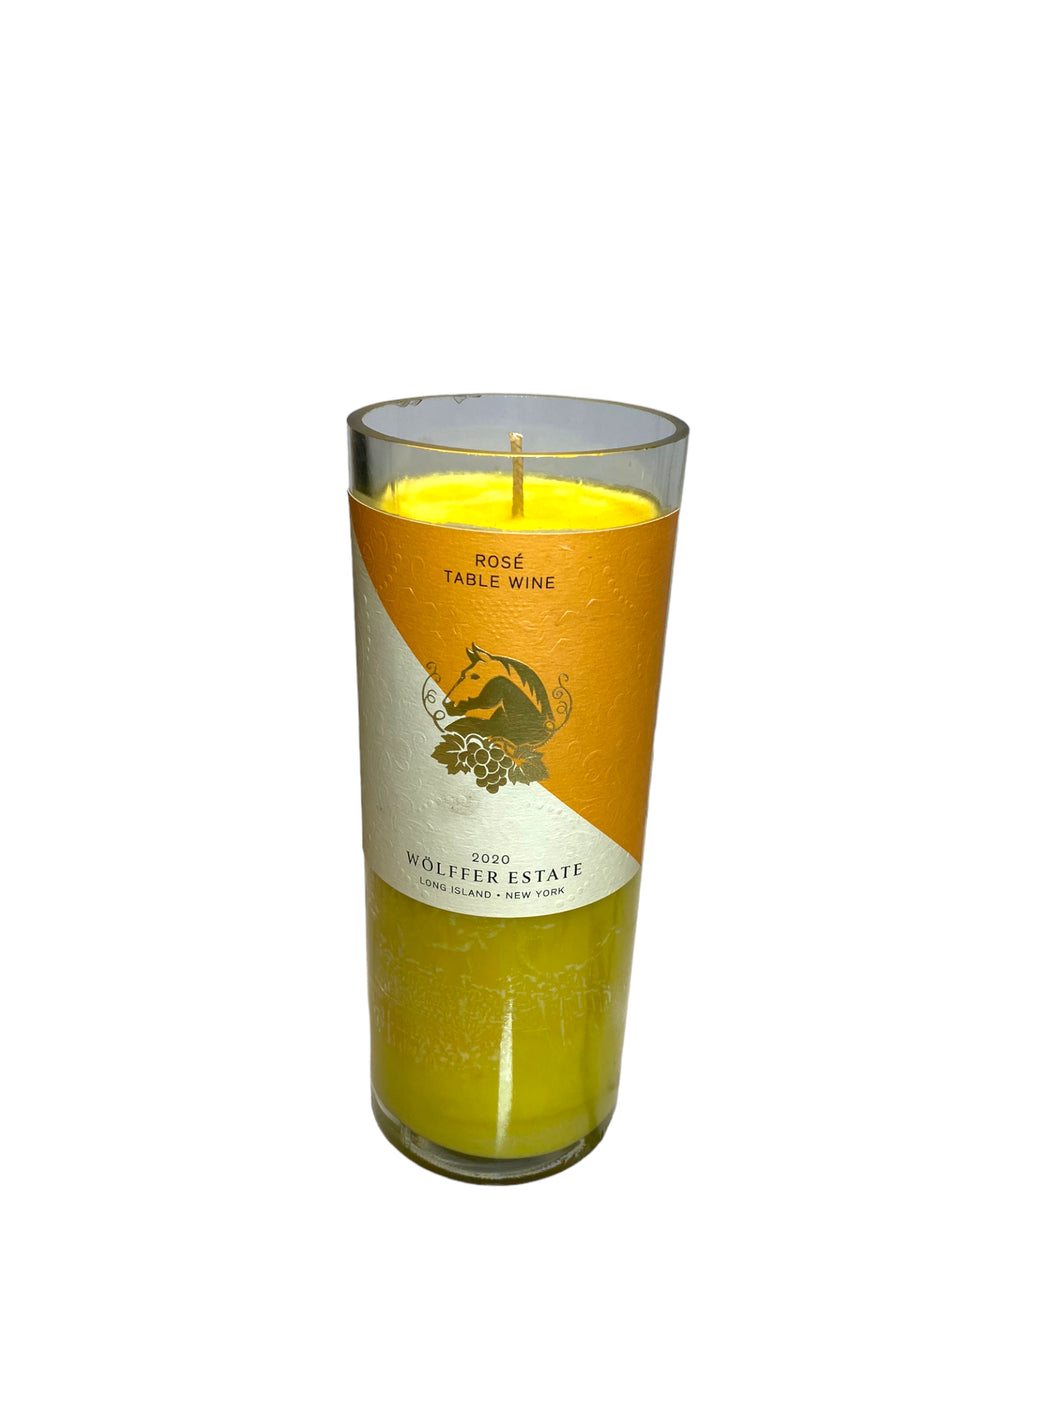 Wollfer Estate Candle. Cucumber Melon Scented. - Candleholic Shop